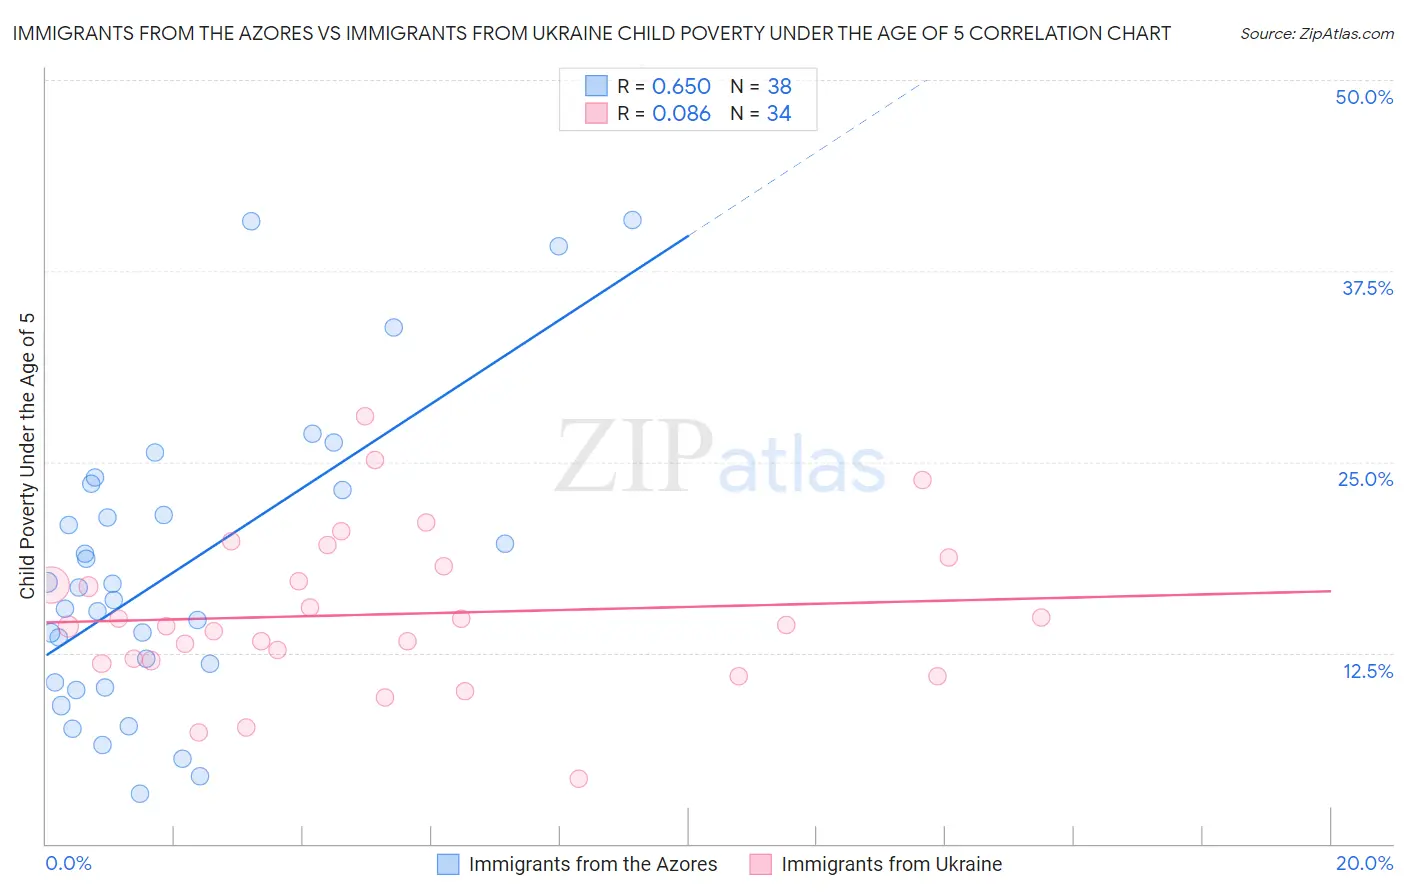 Immigrants from the Azores vs Immigrants from Ukraine Child Poverty Under the Age of 5